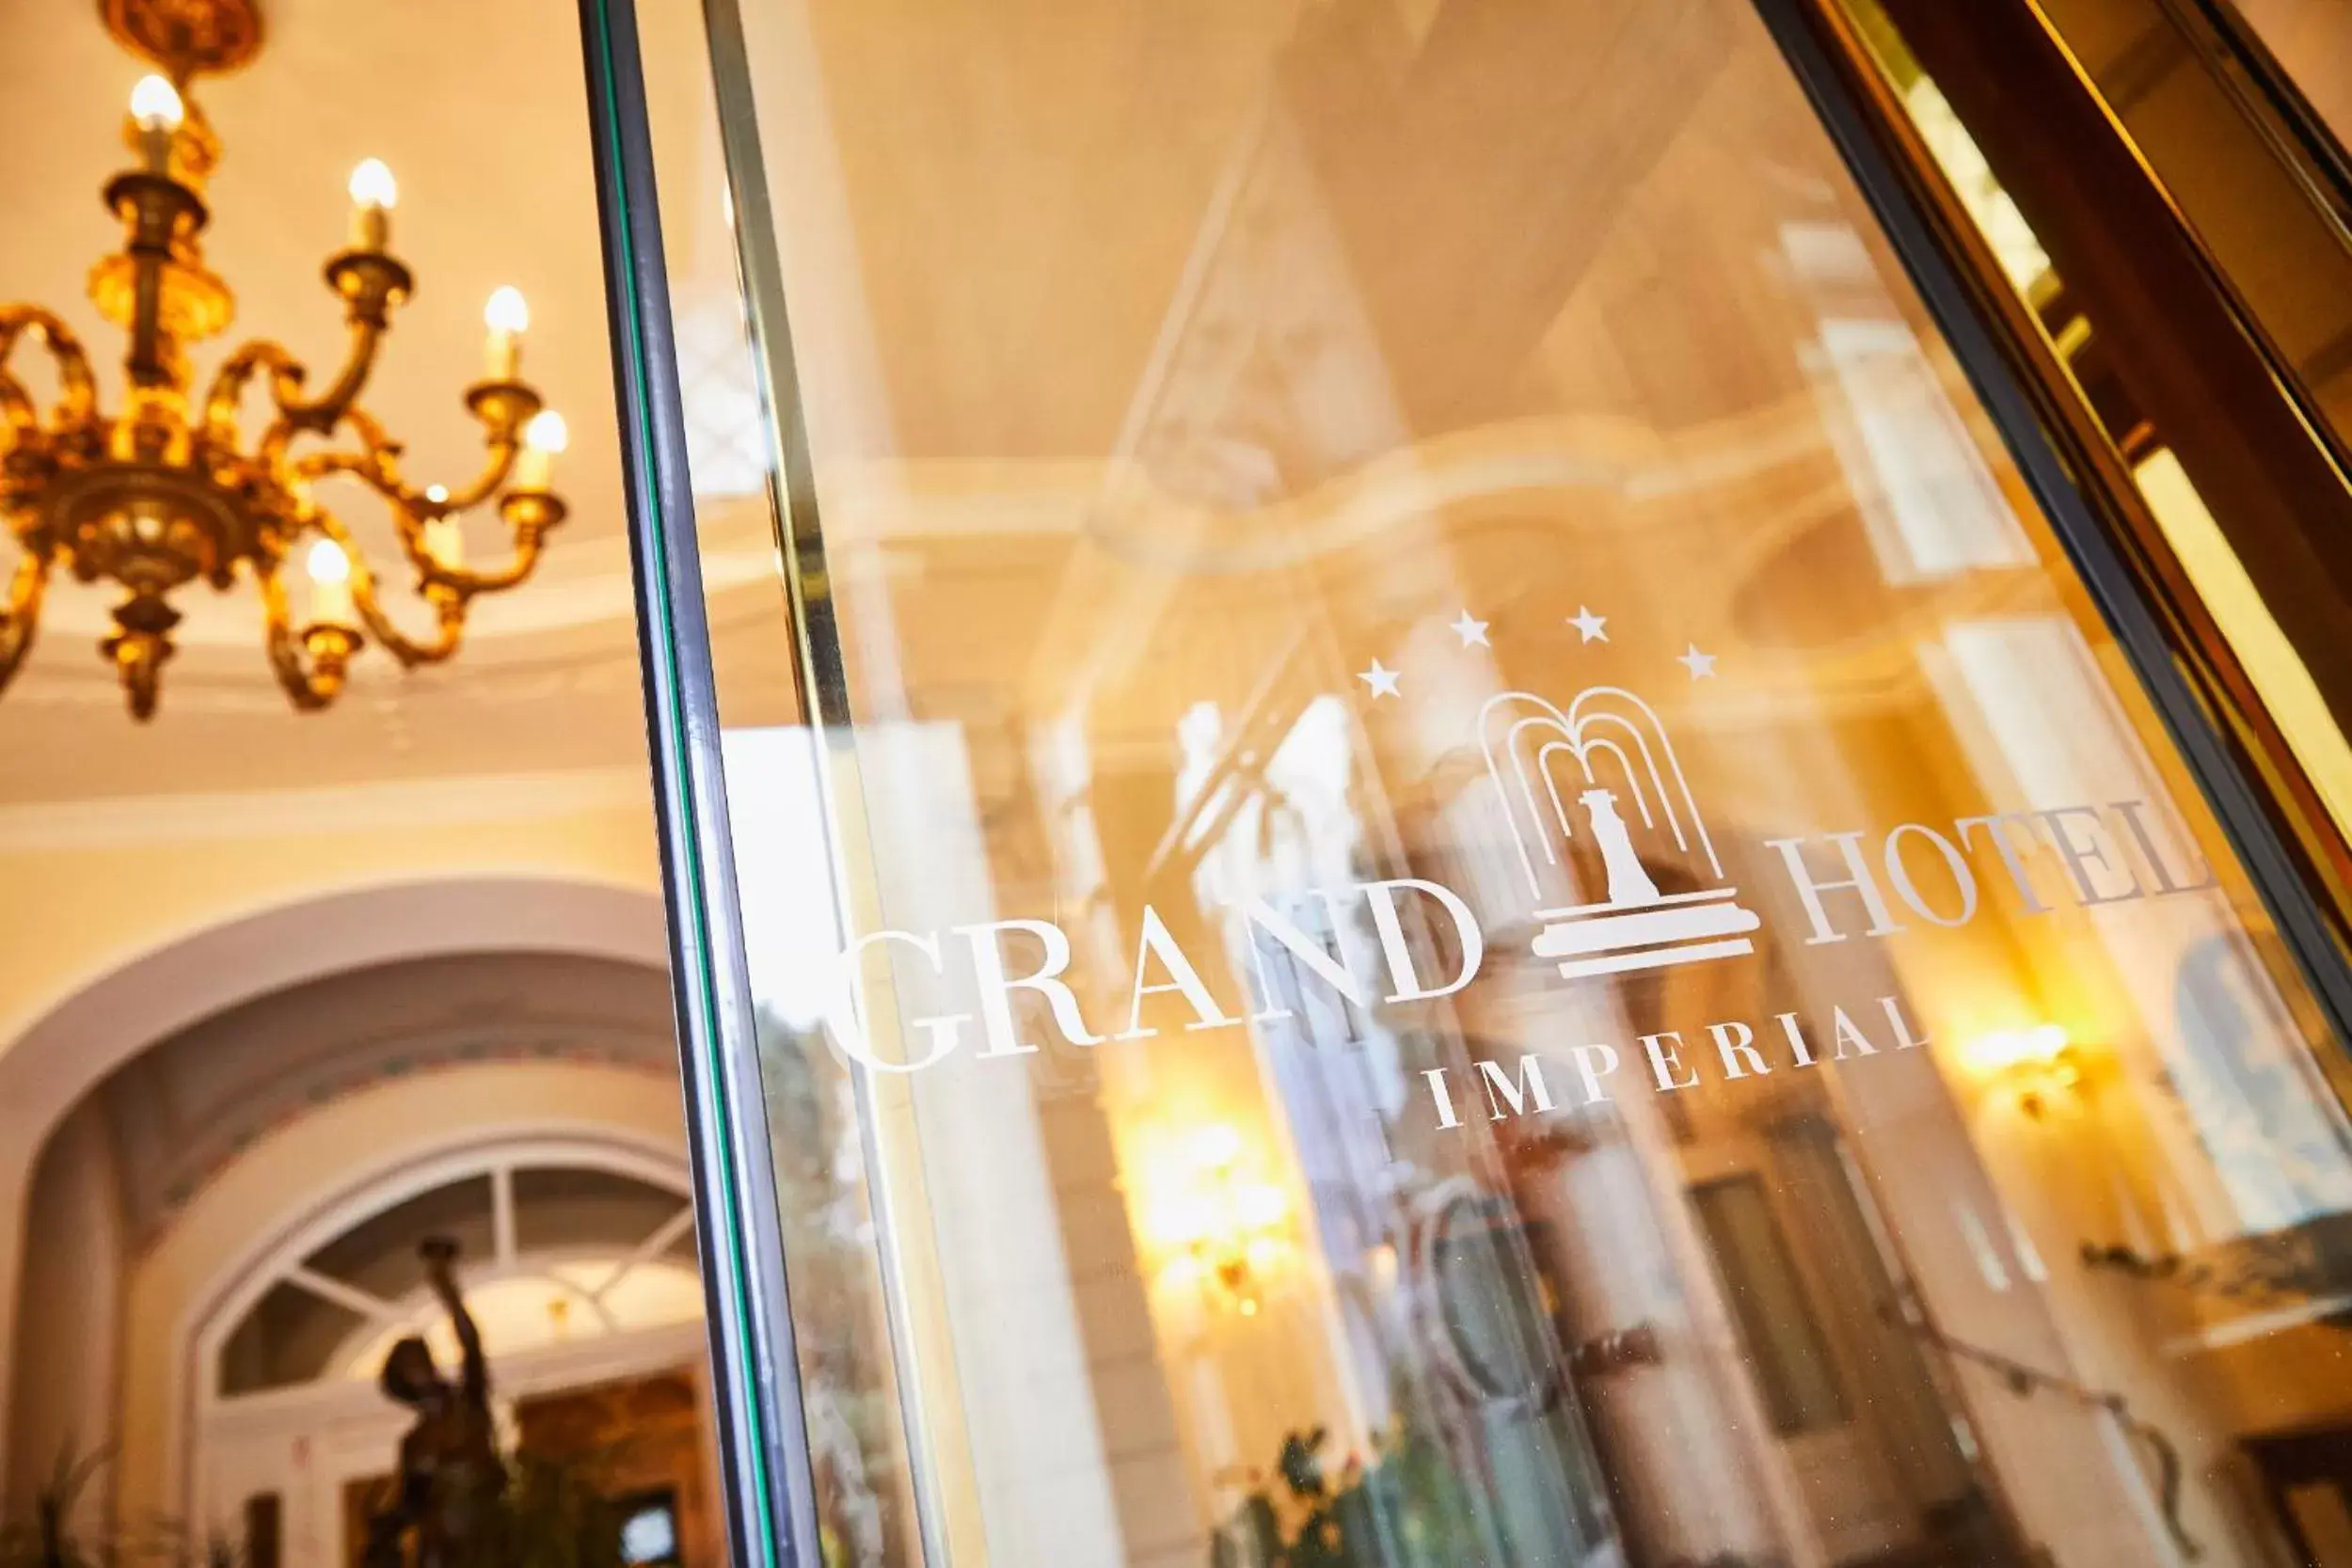 Property logo or sign in Grand Hotel Imperial